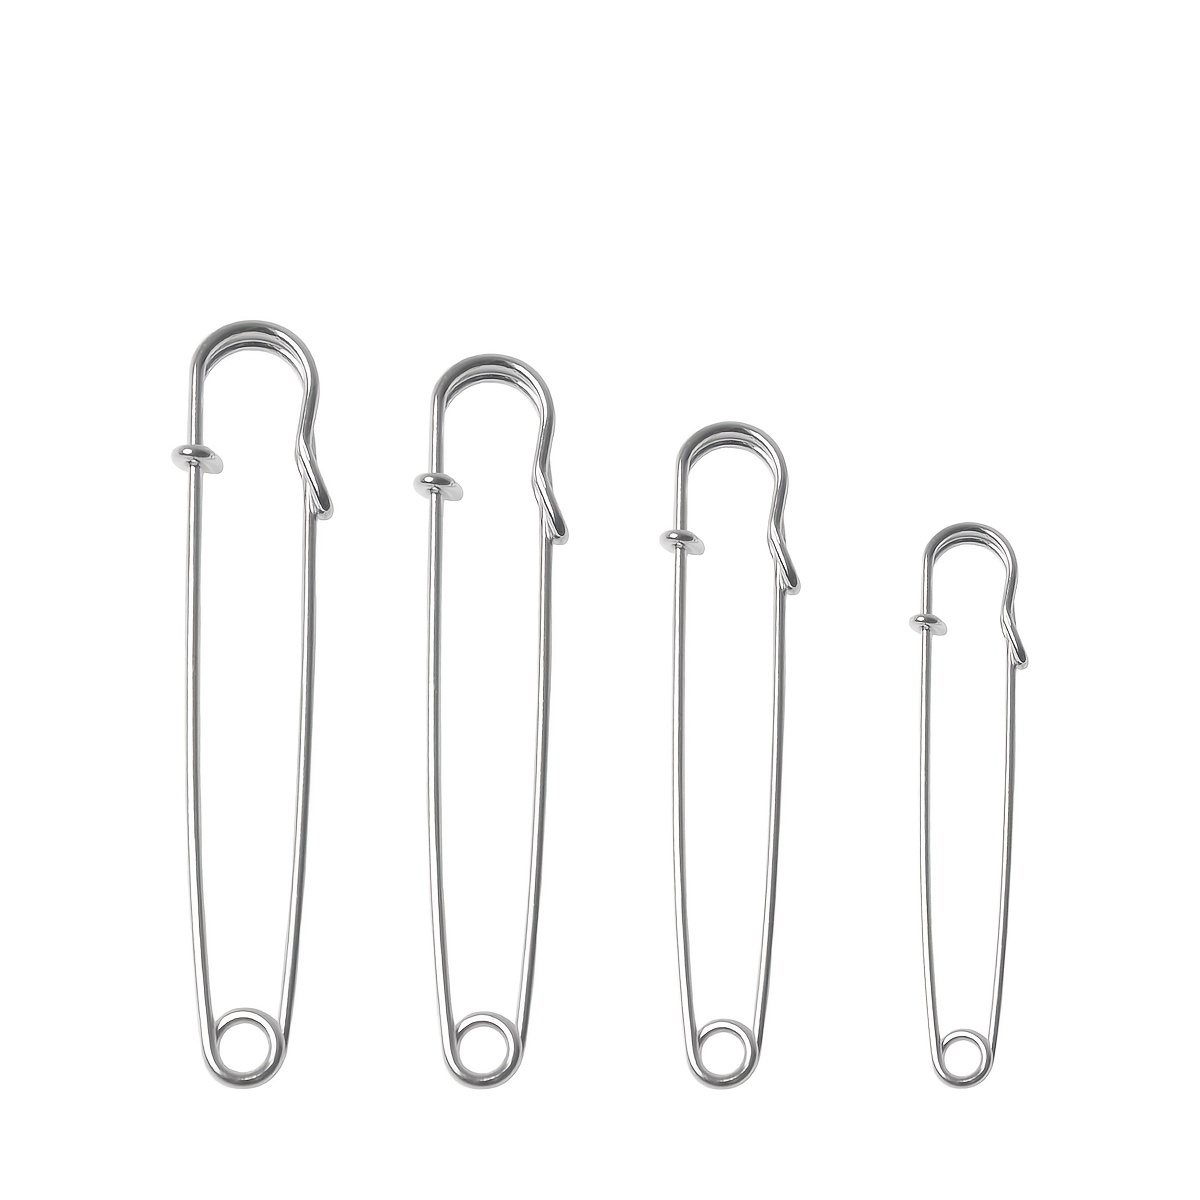 12 Silver Large Size Safety Pins Strong Heavy Duty Leather Crafts,Saree &  Jacket